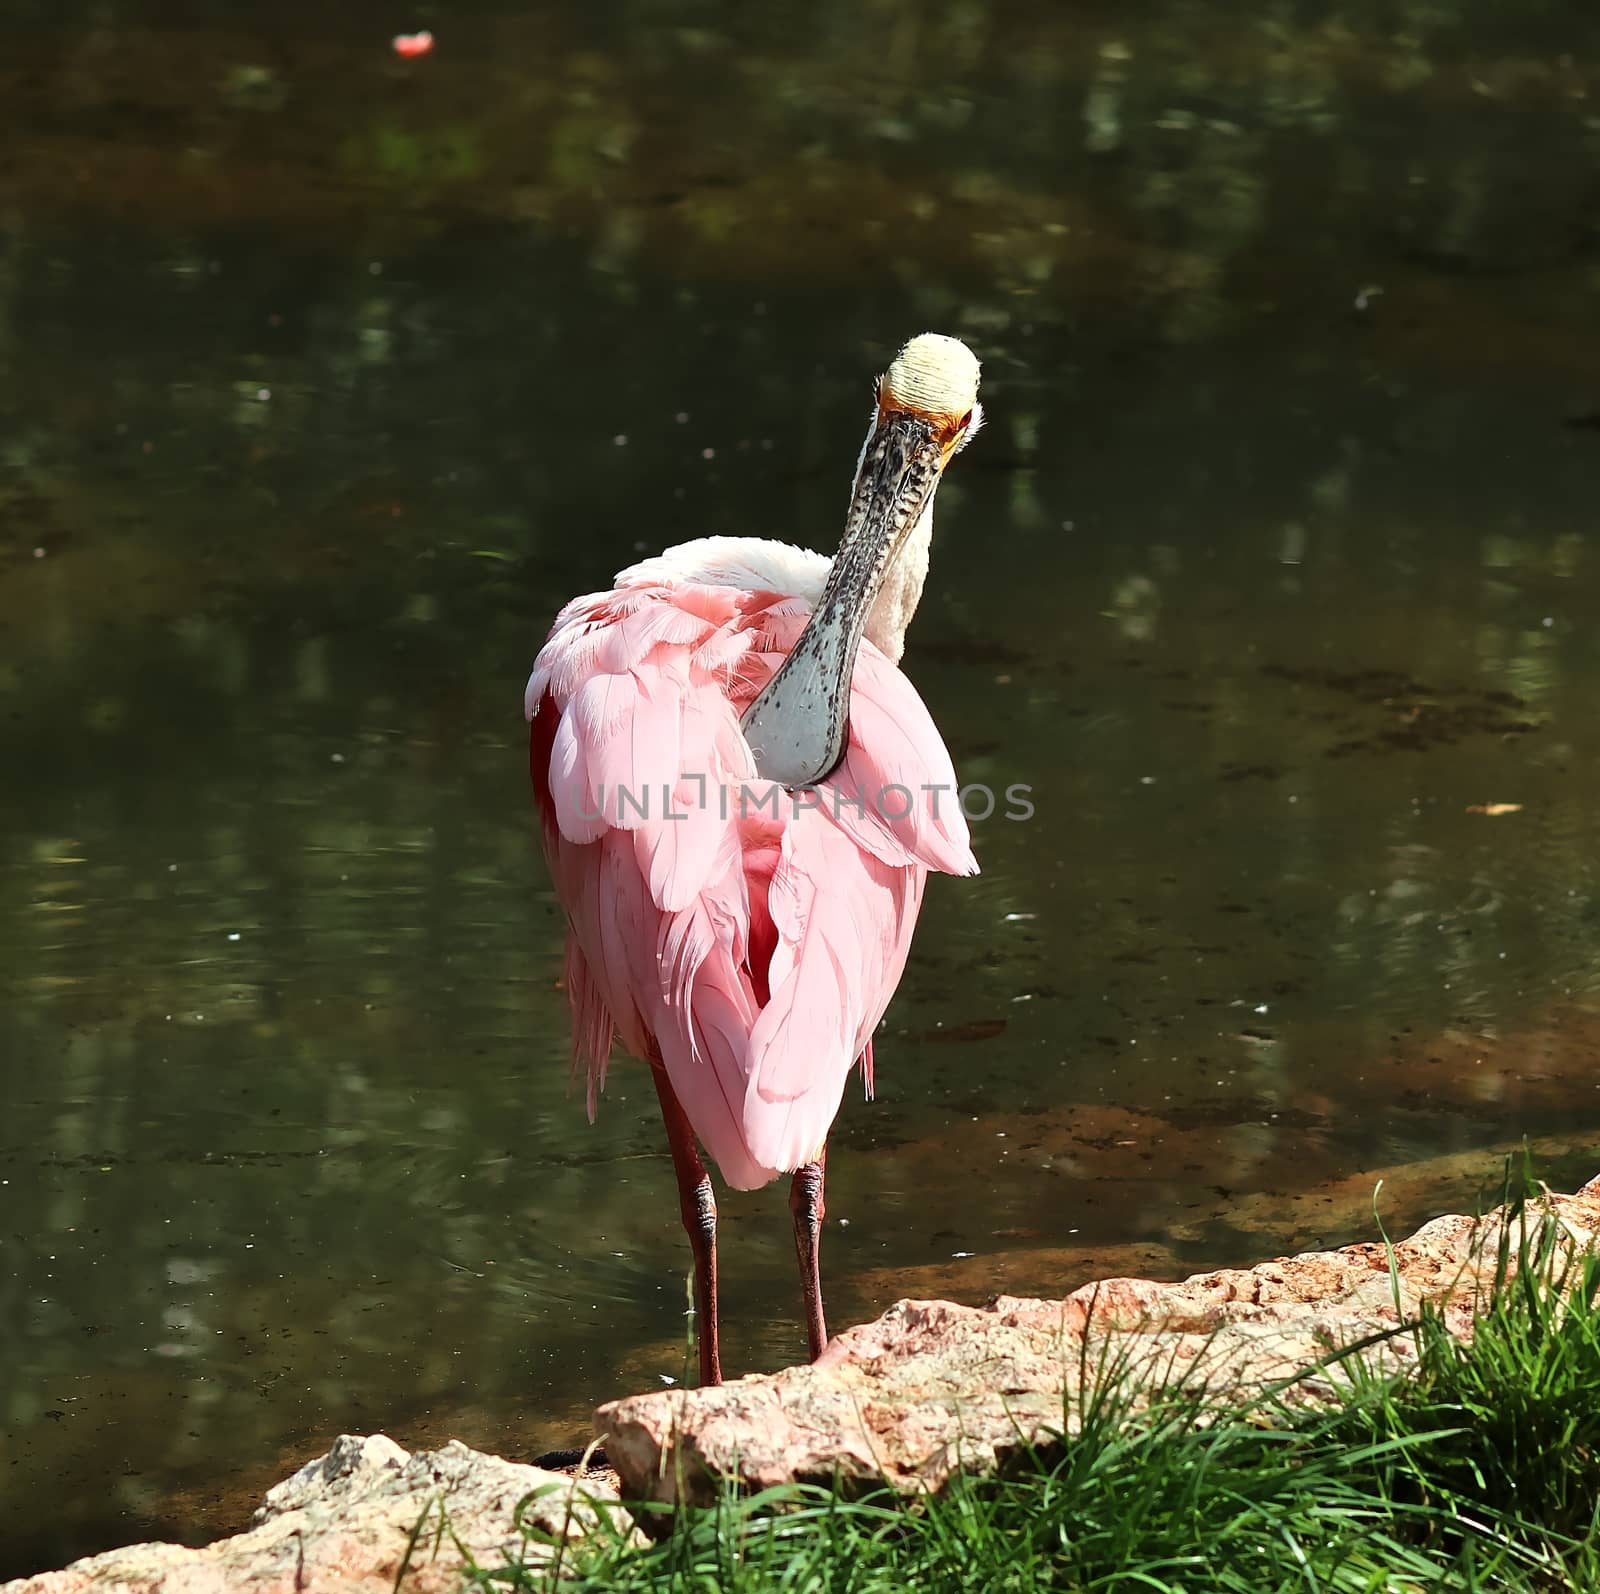 Colorful pink flamingo bird in a close up view on a sunny summer by MP_foto71